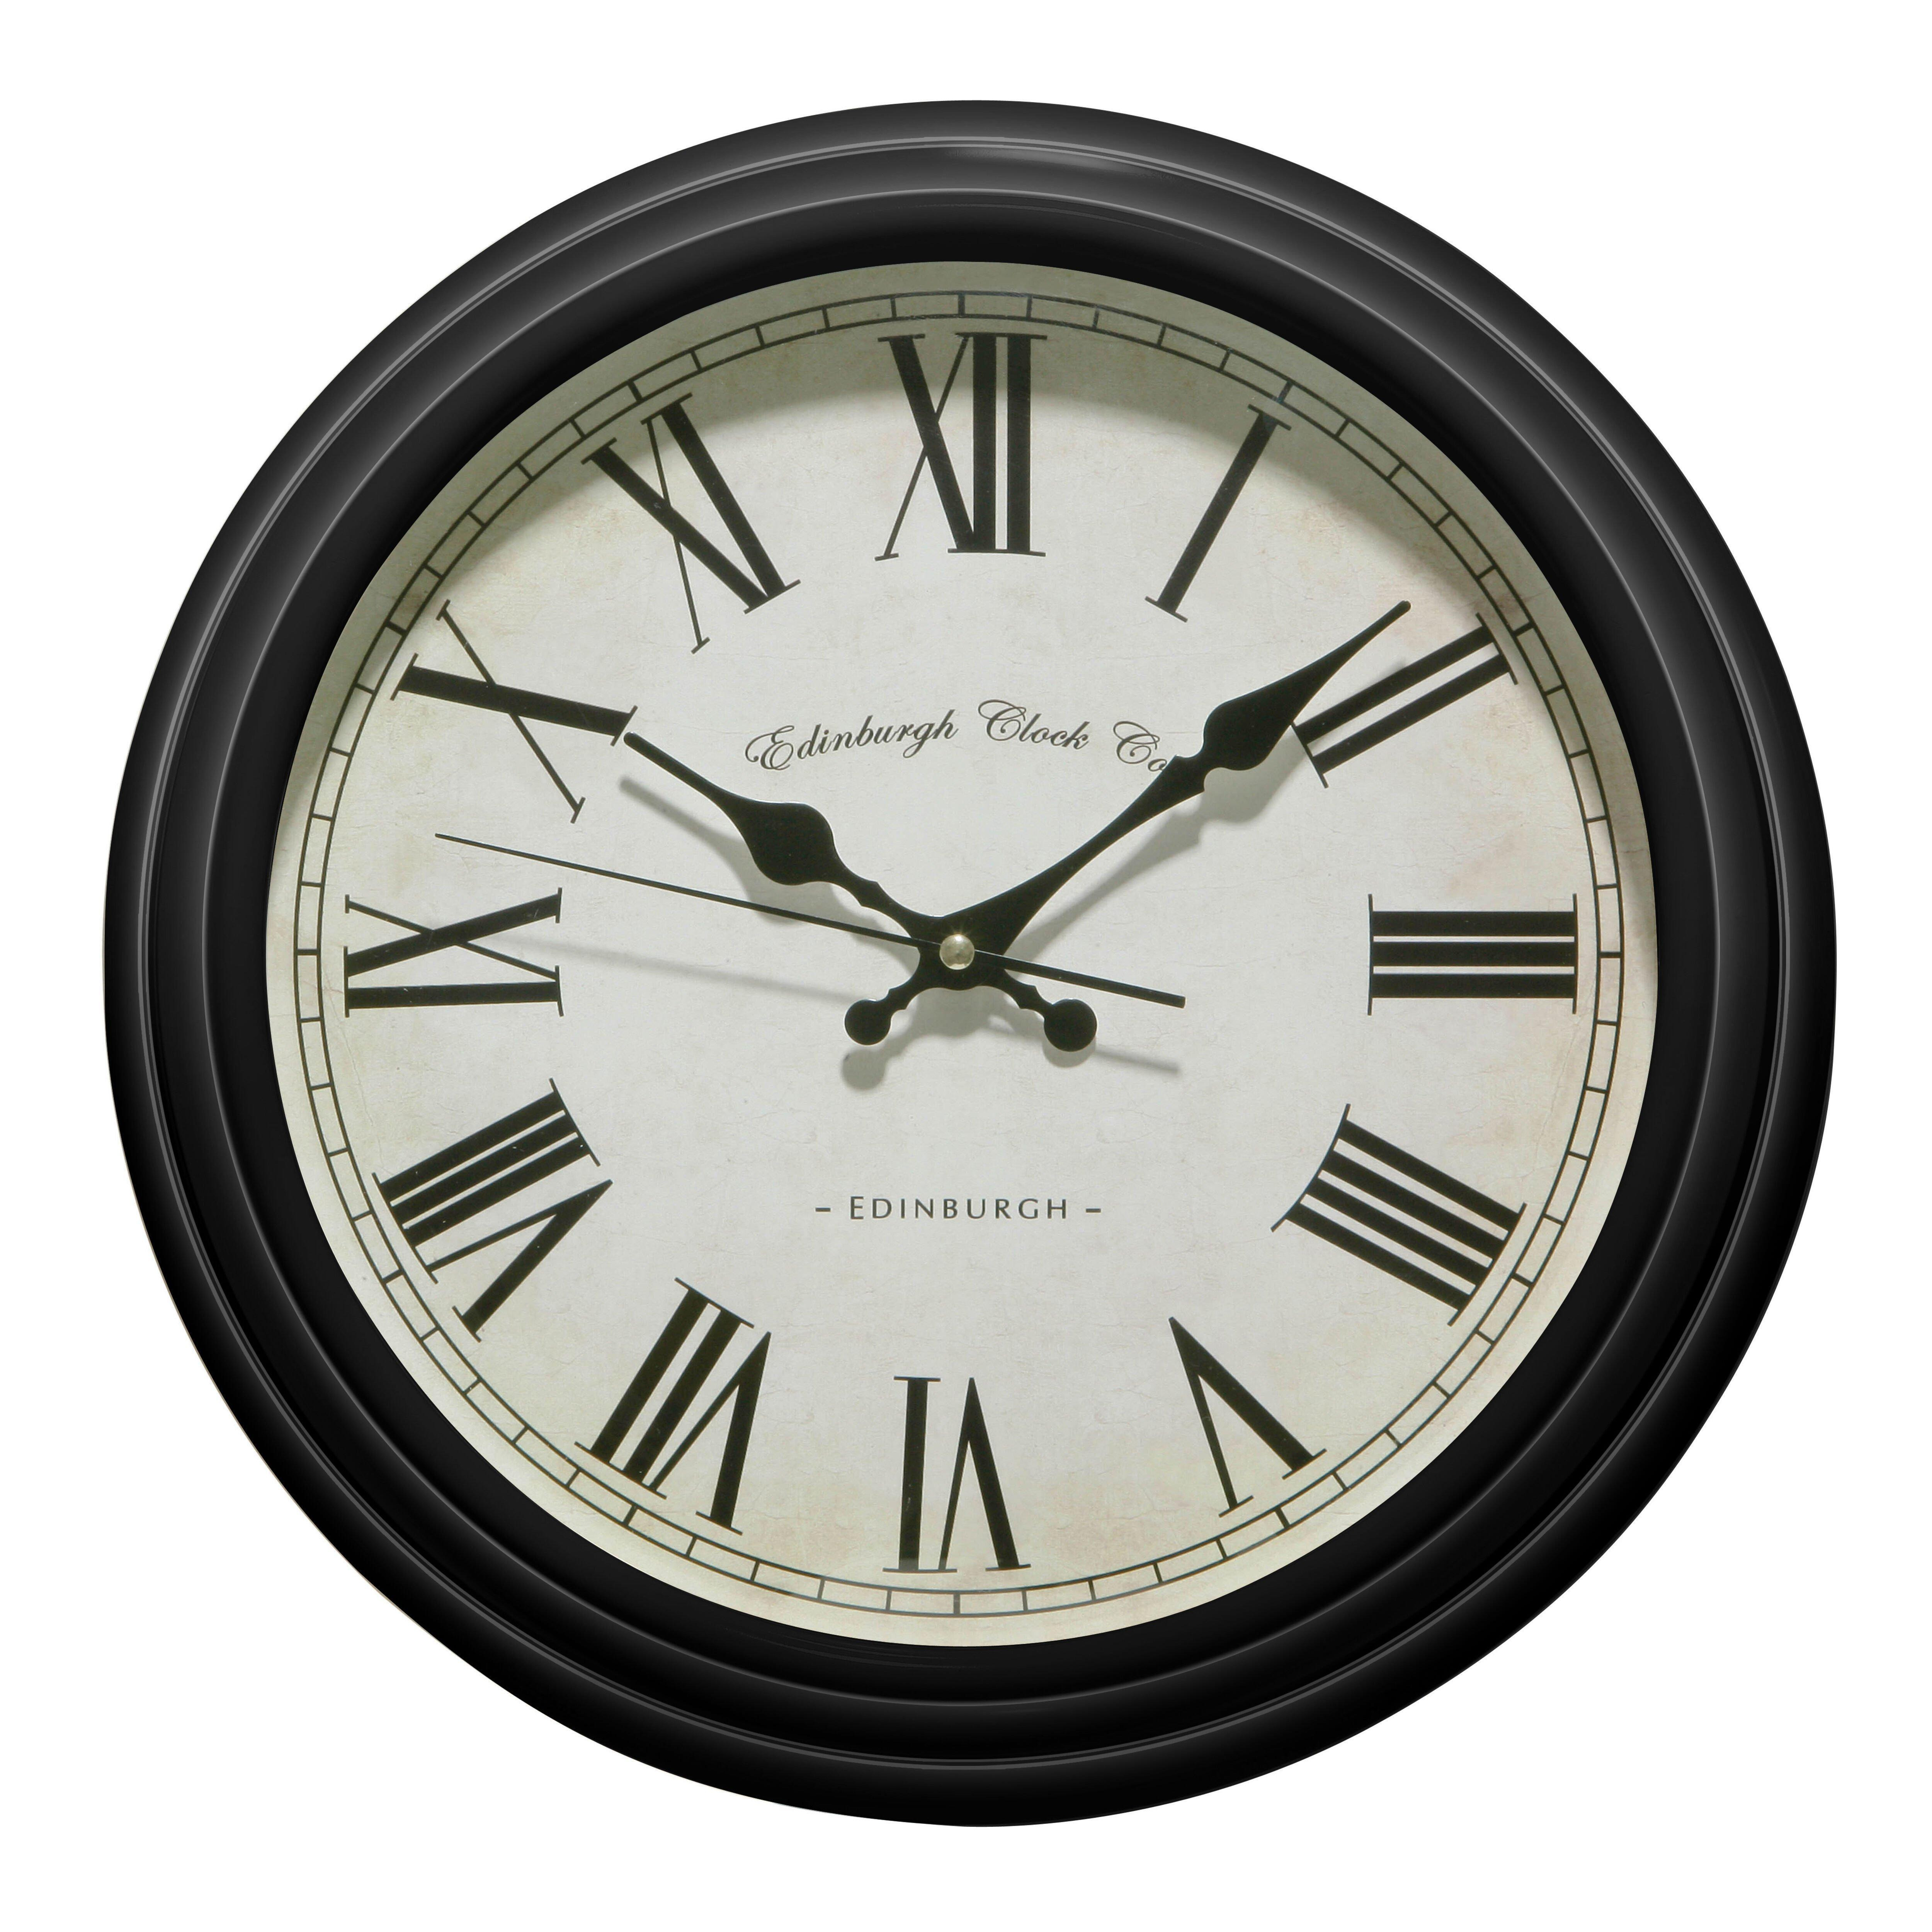 Interiors by Premier Black Lined Rim Wall Clock - image 1